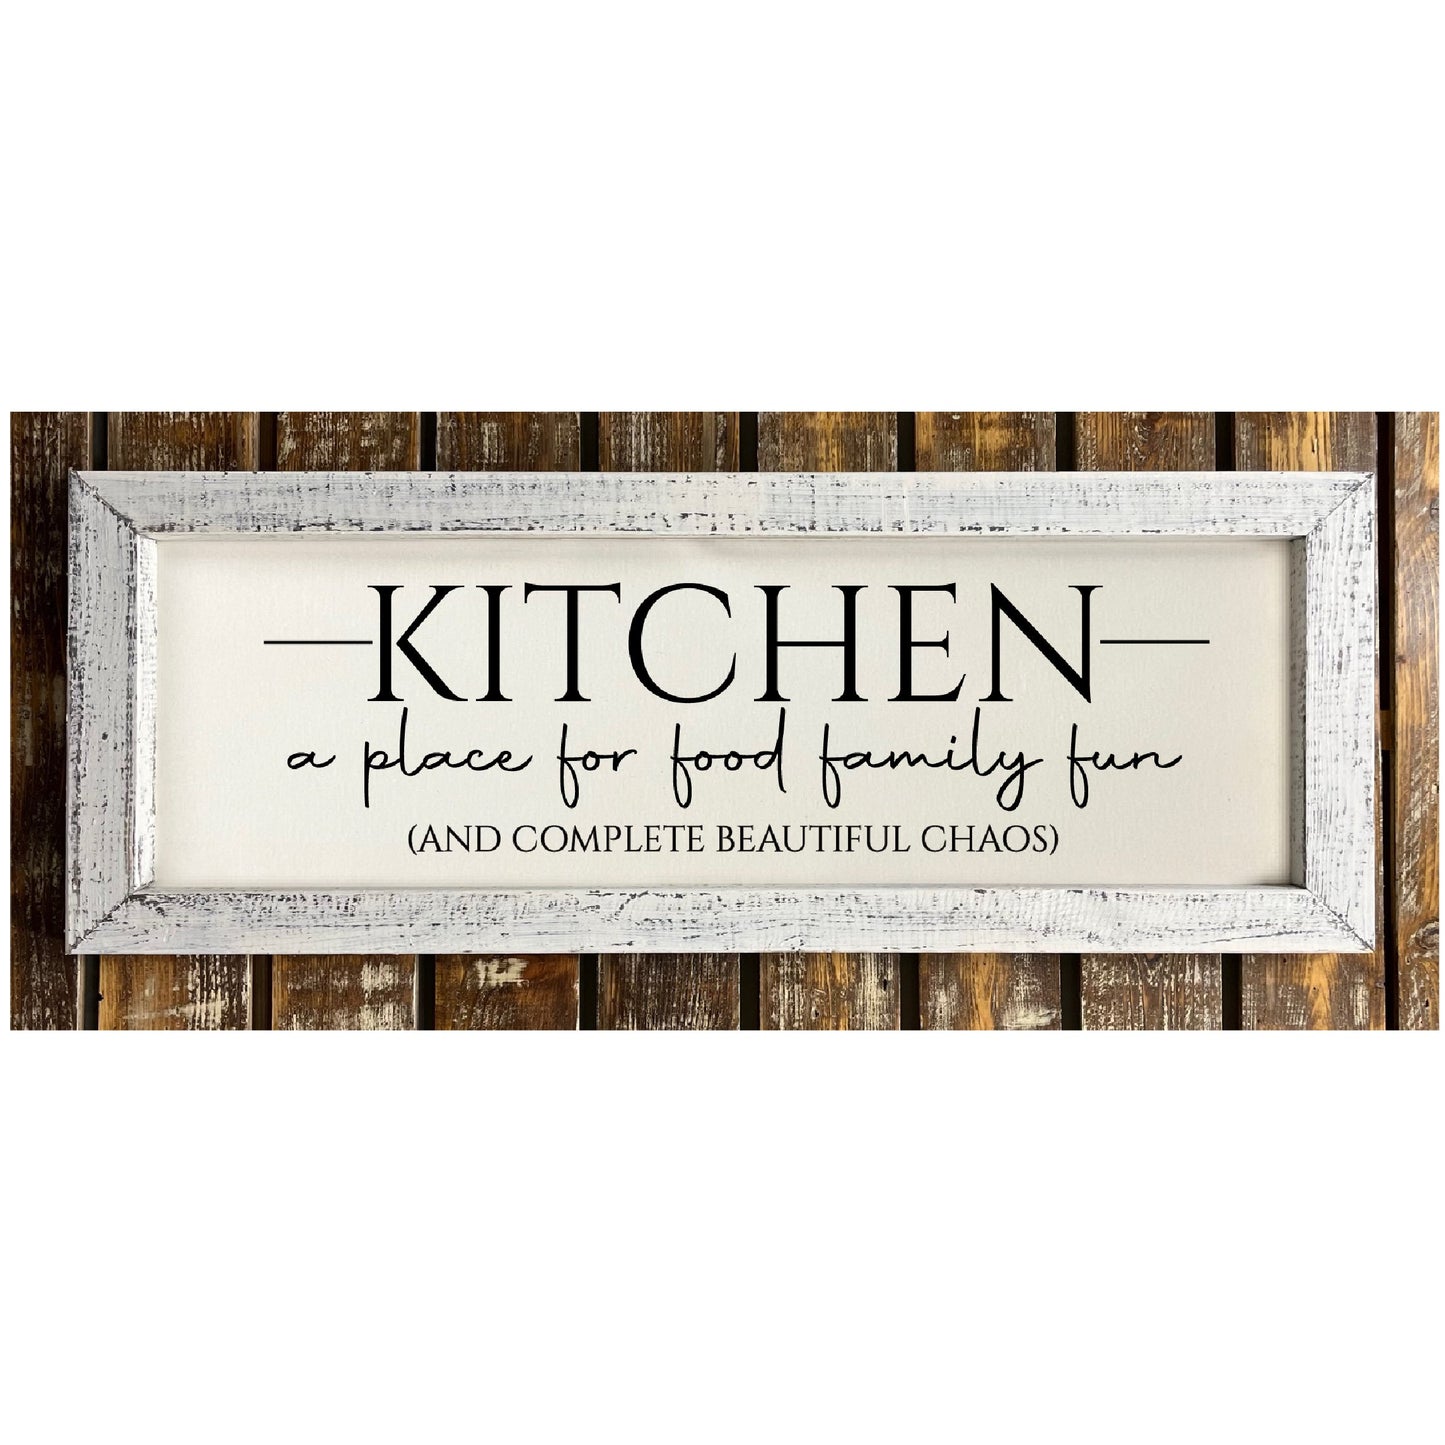 Kitchen.. A Place for Food Family Fun